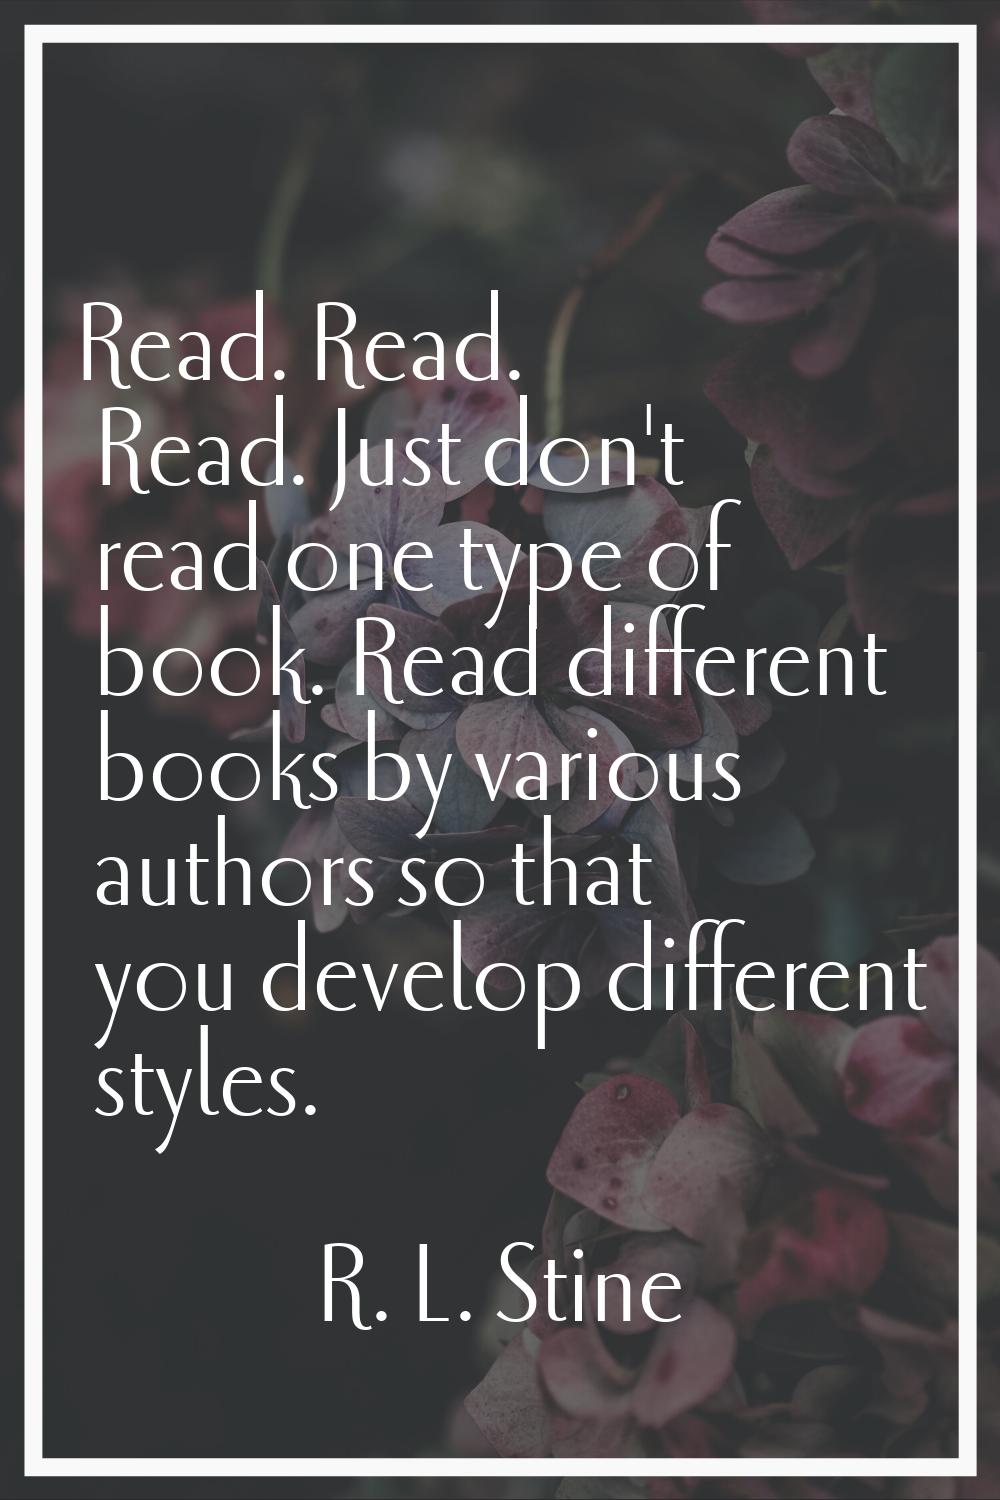 Read. Read. Read. Just don't read one type of book. Read different books by various authors so that